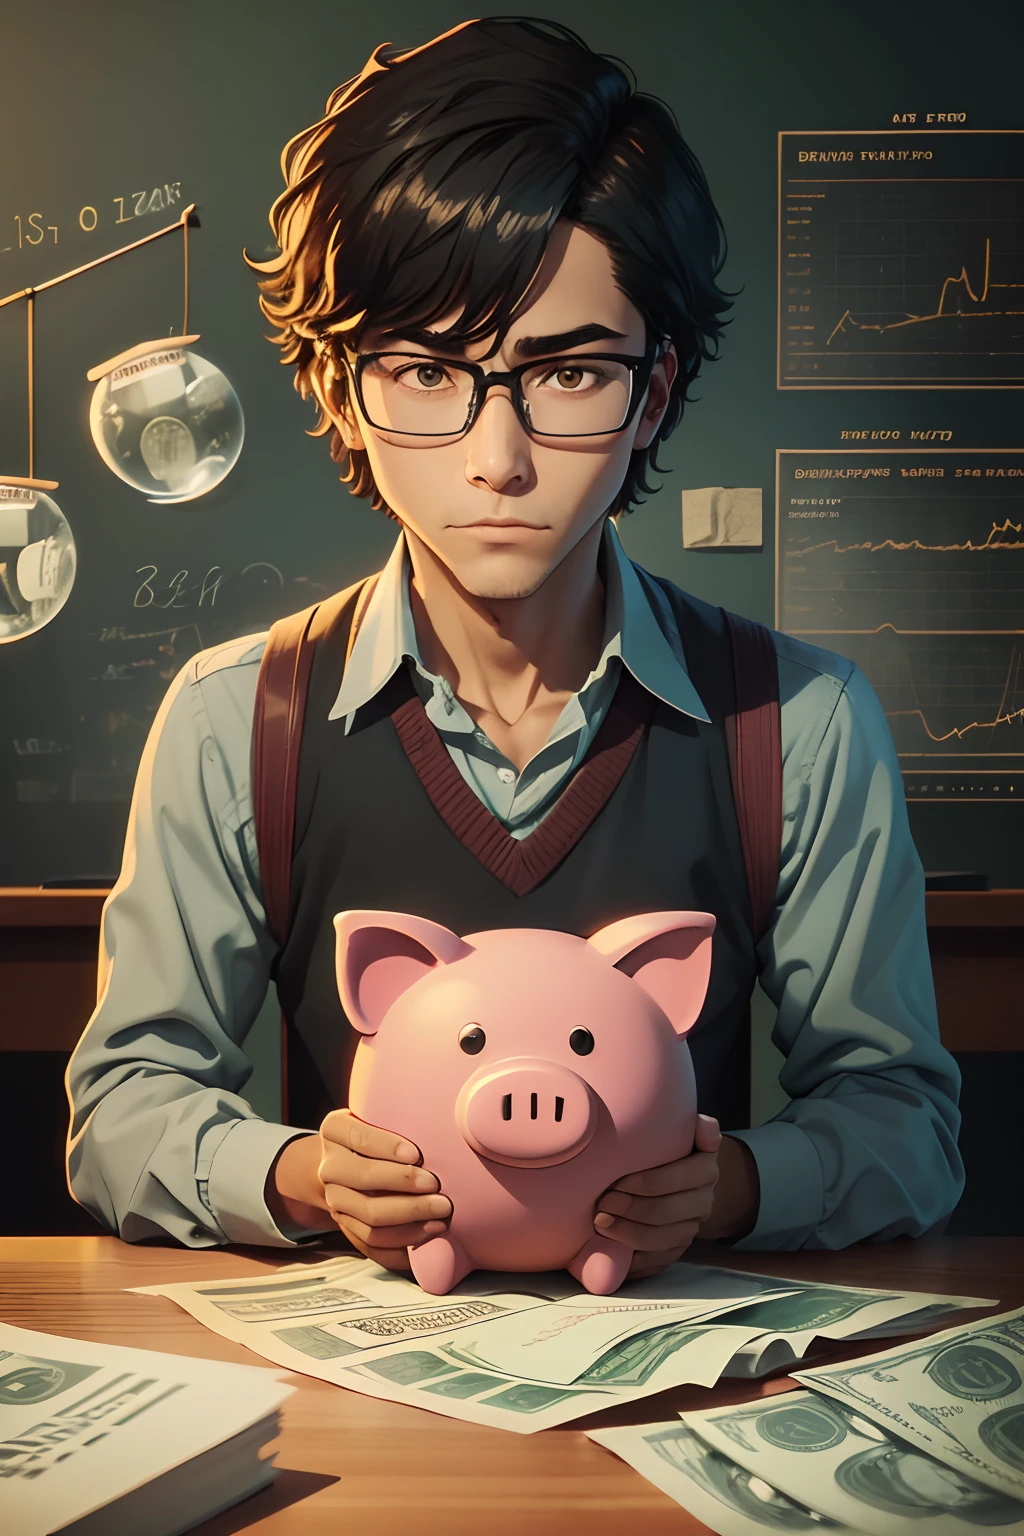 The prompt for Stable Diffusion is:

"A boy teaching finance, sitting in a chair, with a humorous twist. Illustration, high quality:1.2, ultra-detailed, realistic:1.37, vivid colors, portraits, warm color tones, soft lighting, playful attitude, pencil shavings, stacks of money, dollar signs, a blackboard with financial equations, a magnifying glass examining a stock chart, a piggy bank with a mischievous expression, a thought bubble with dollar signs, a piece of paper with the words 'Financial Wisdom' written on it, a stock market graph in the background, a briefcase with money spilling out, and a pile of books about economics and investing."

Please note that the prompt should not contain any prefix.